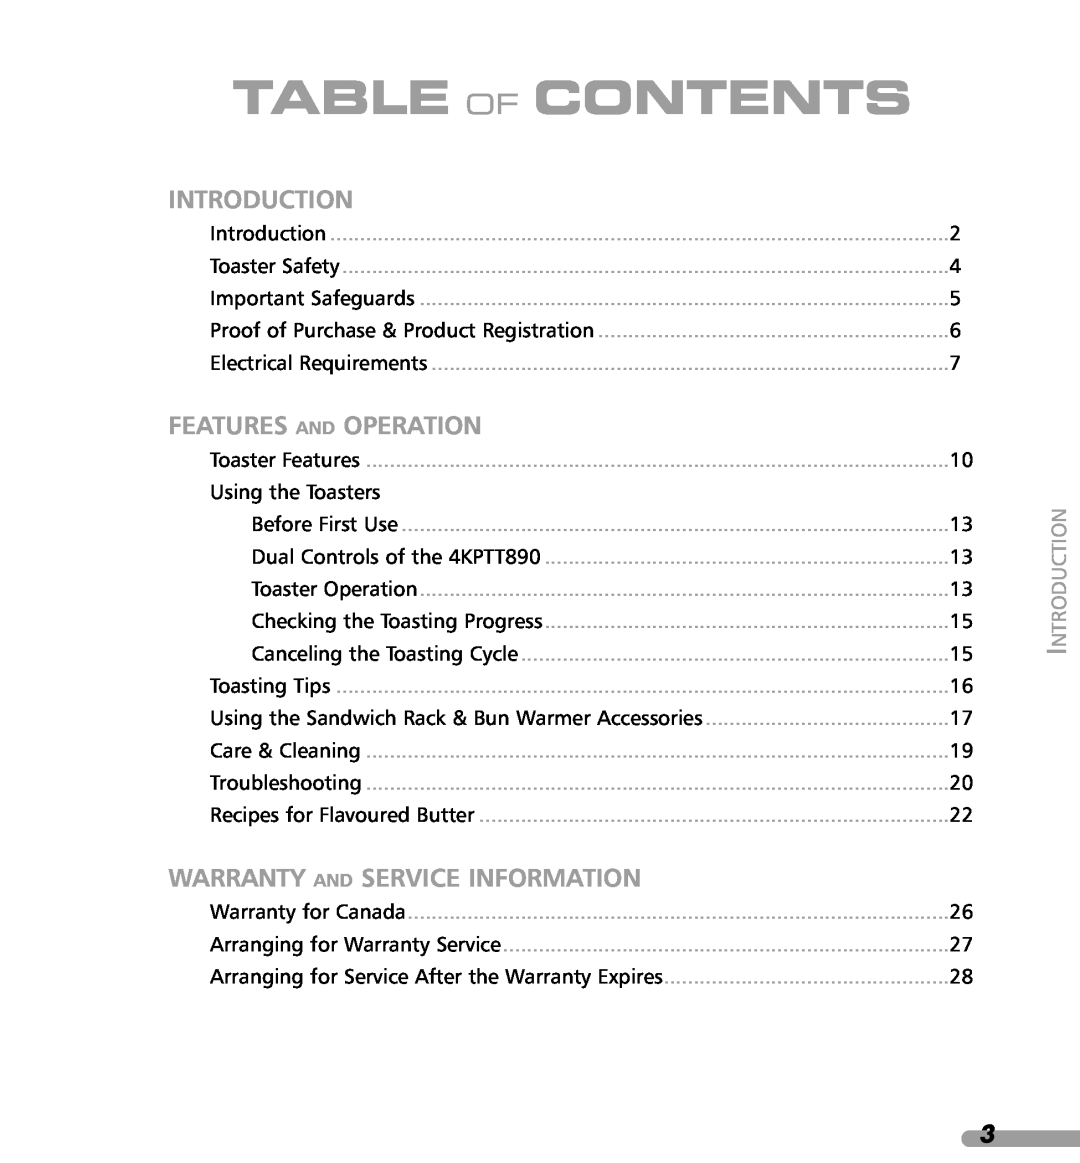 KitchenAid 4KPTT890, 4KPTT780 Table Of Contents, Introduction, Features And Operation, Warranty And Service Information 